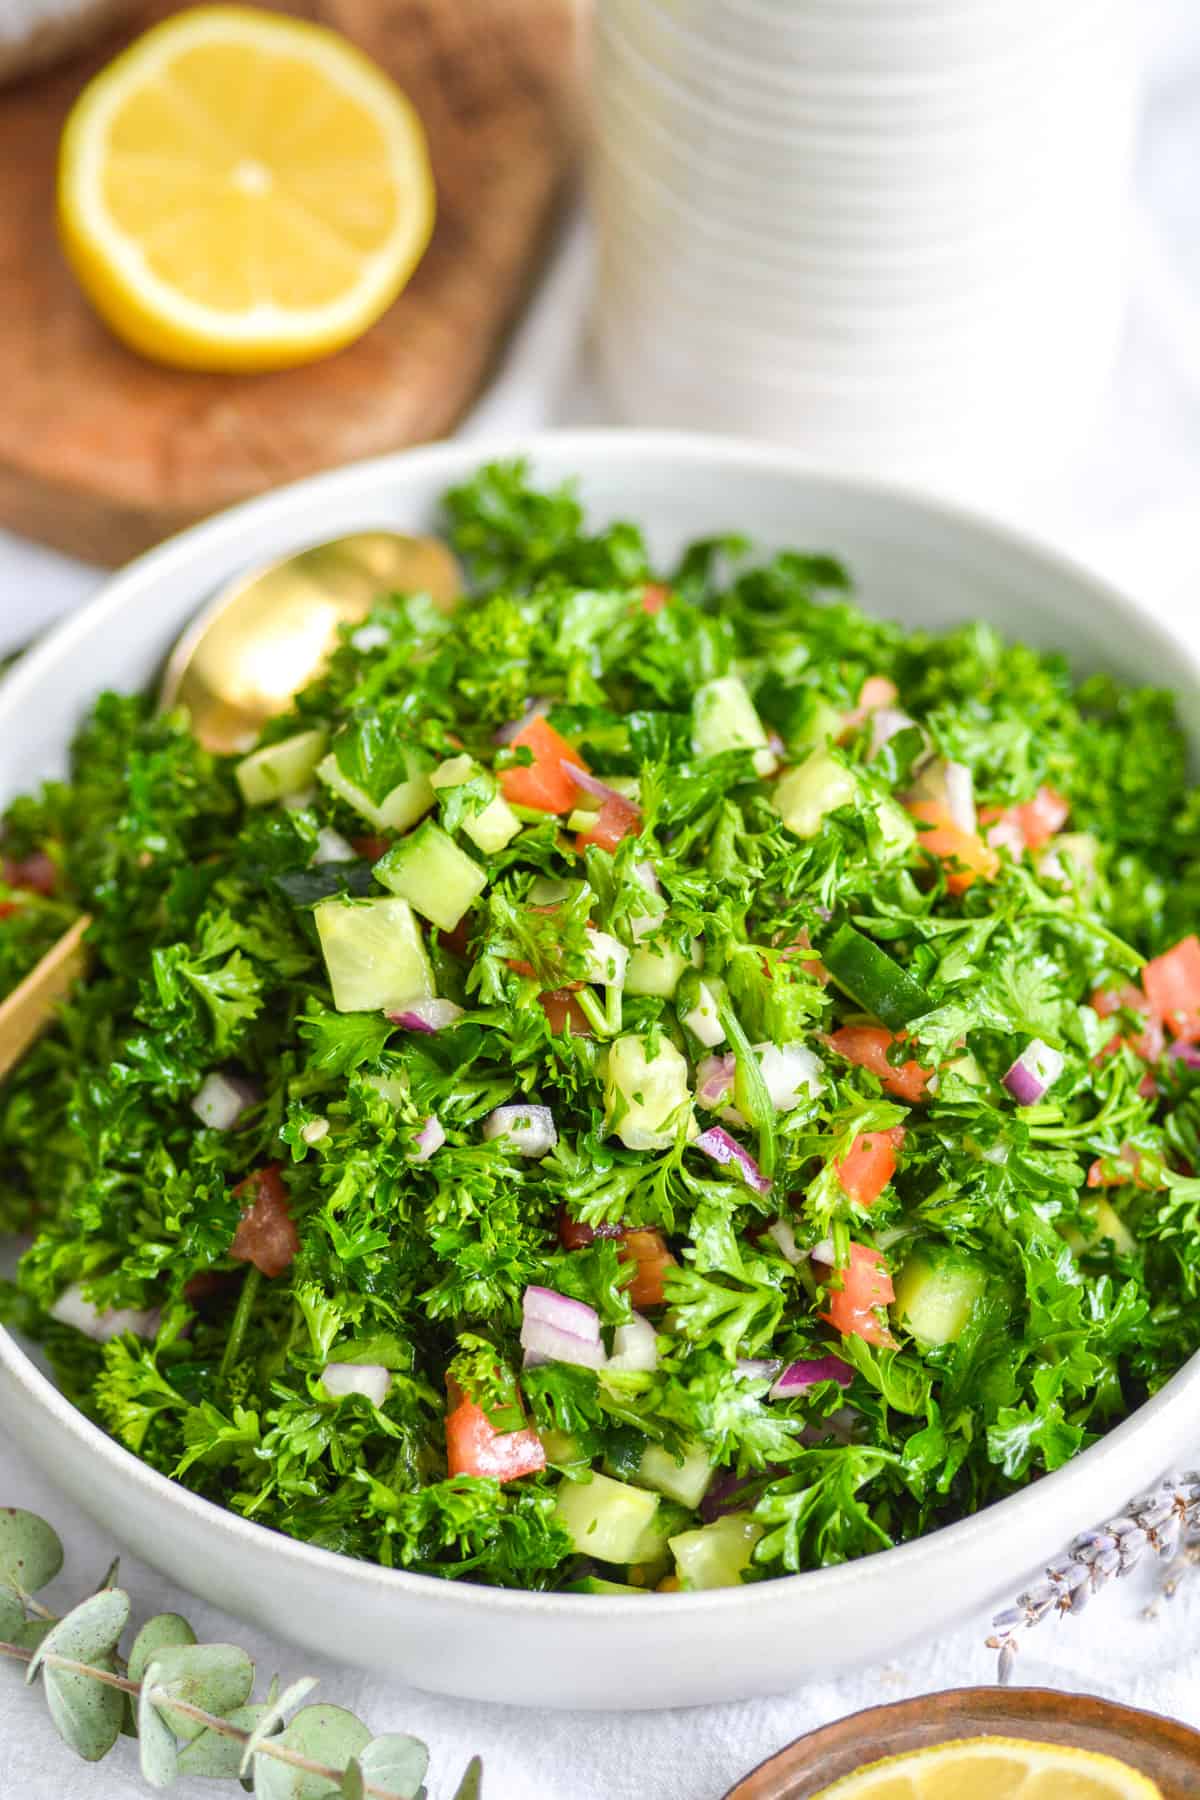 Grain-Free Tabbouleh Salad recipe in a white bowl on a white cloth with a lemon slice in the background.